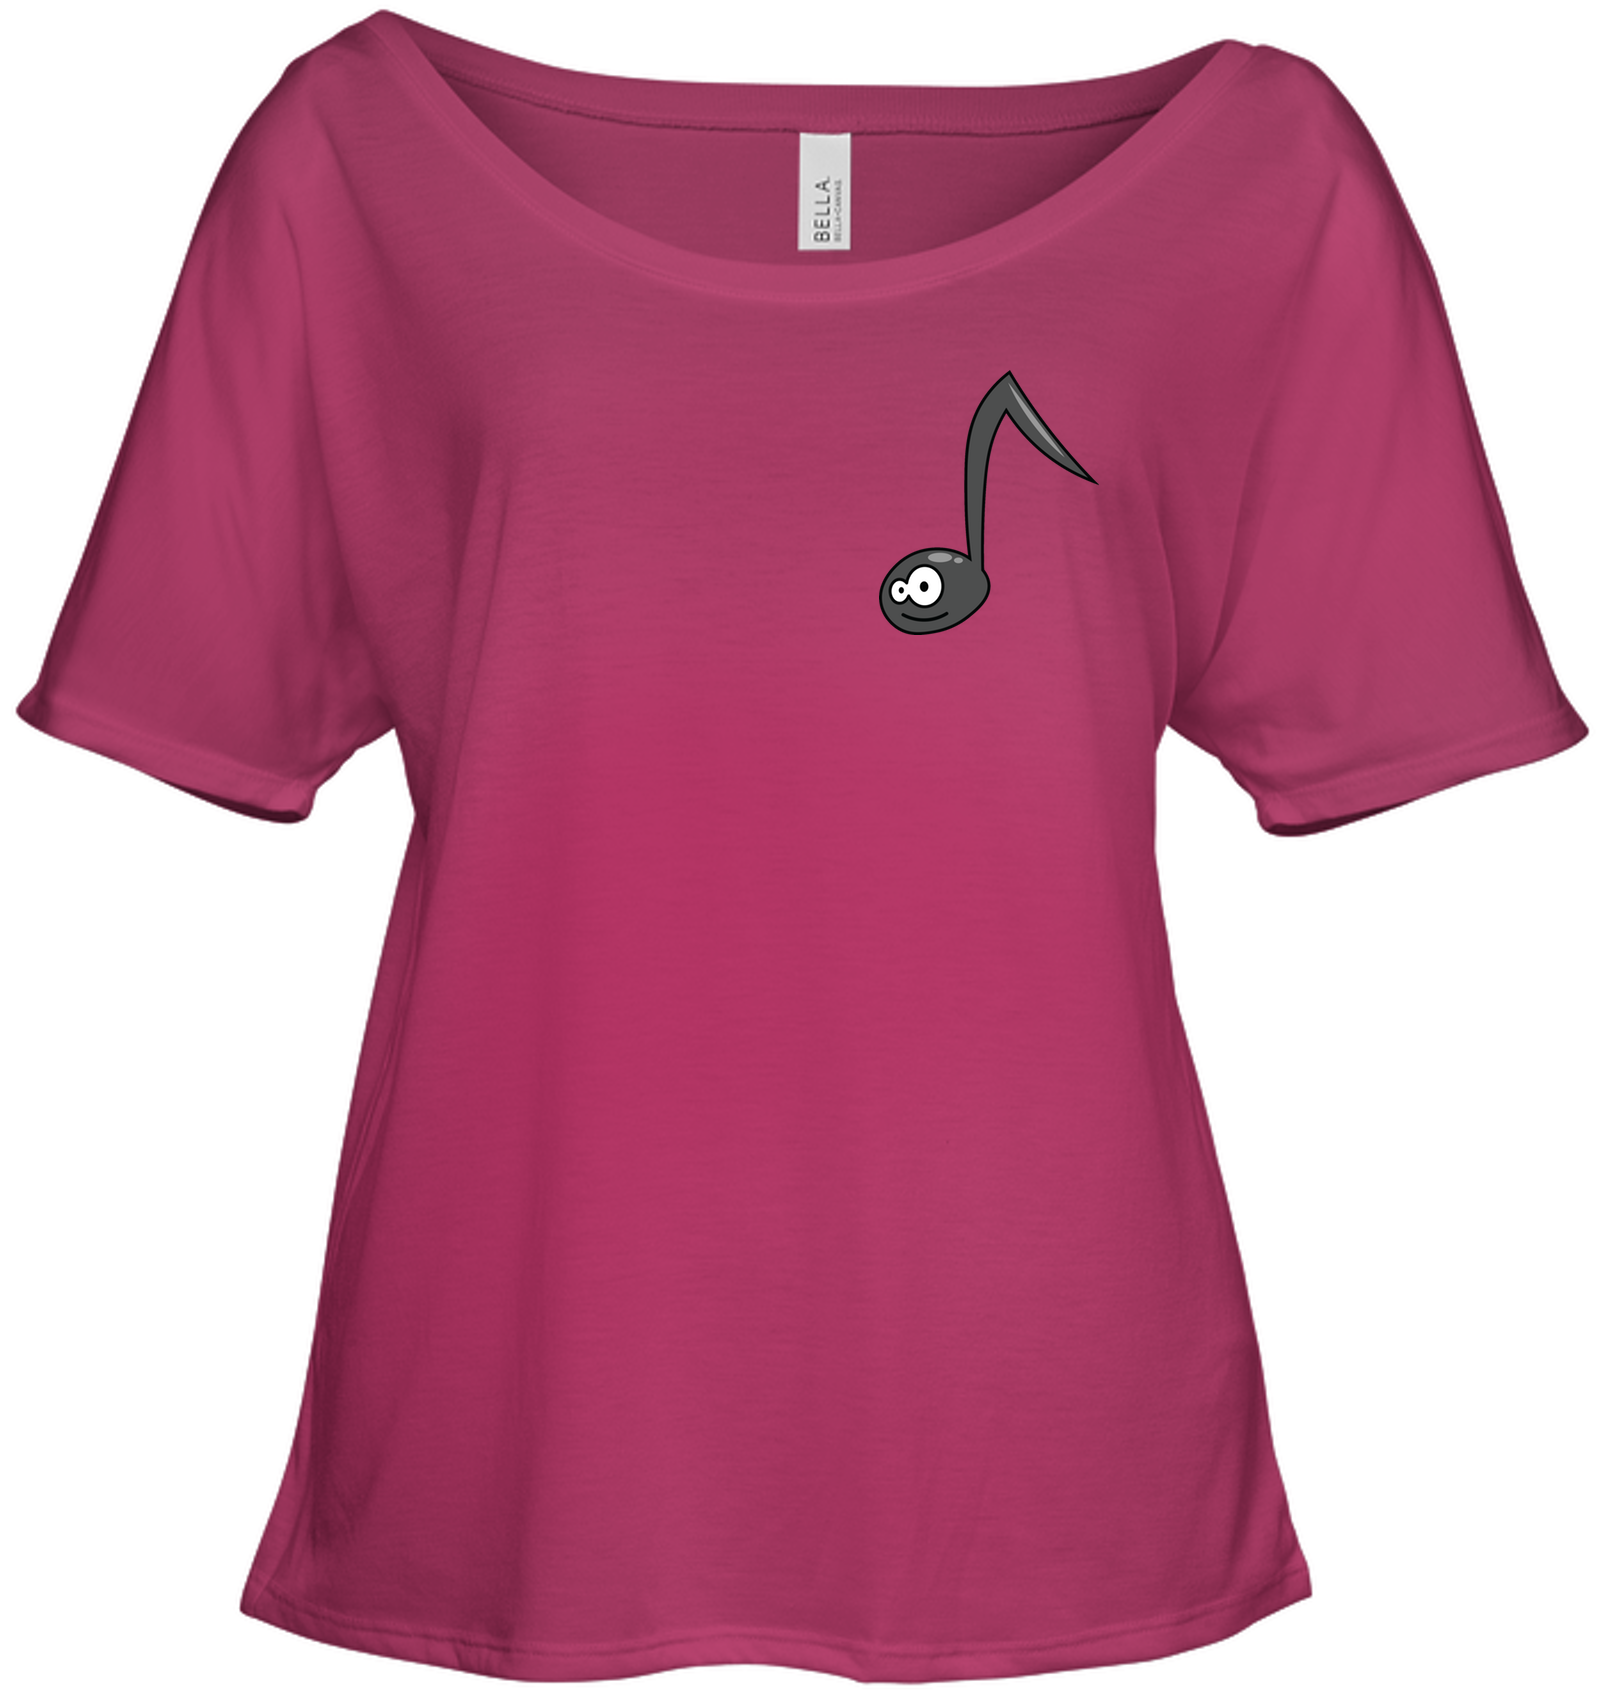 Curious Note (Pocket Size) - Bella + Canvas Women's Slouchy Tee